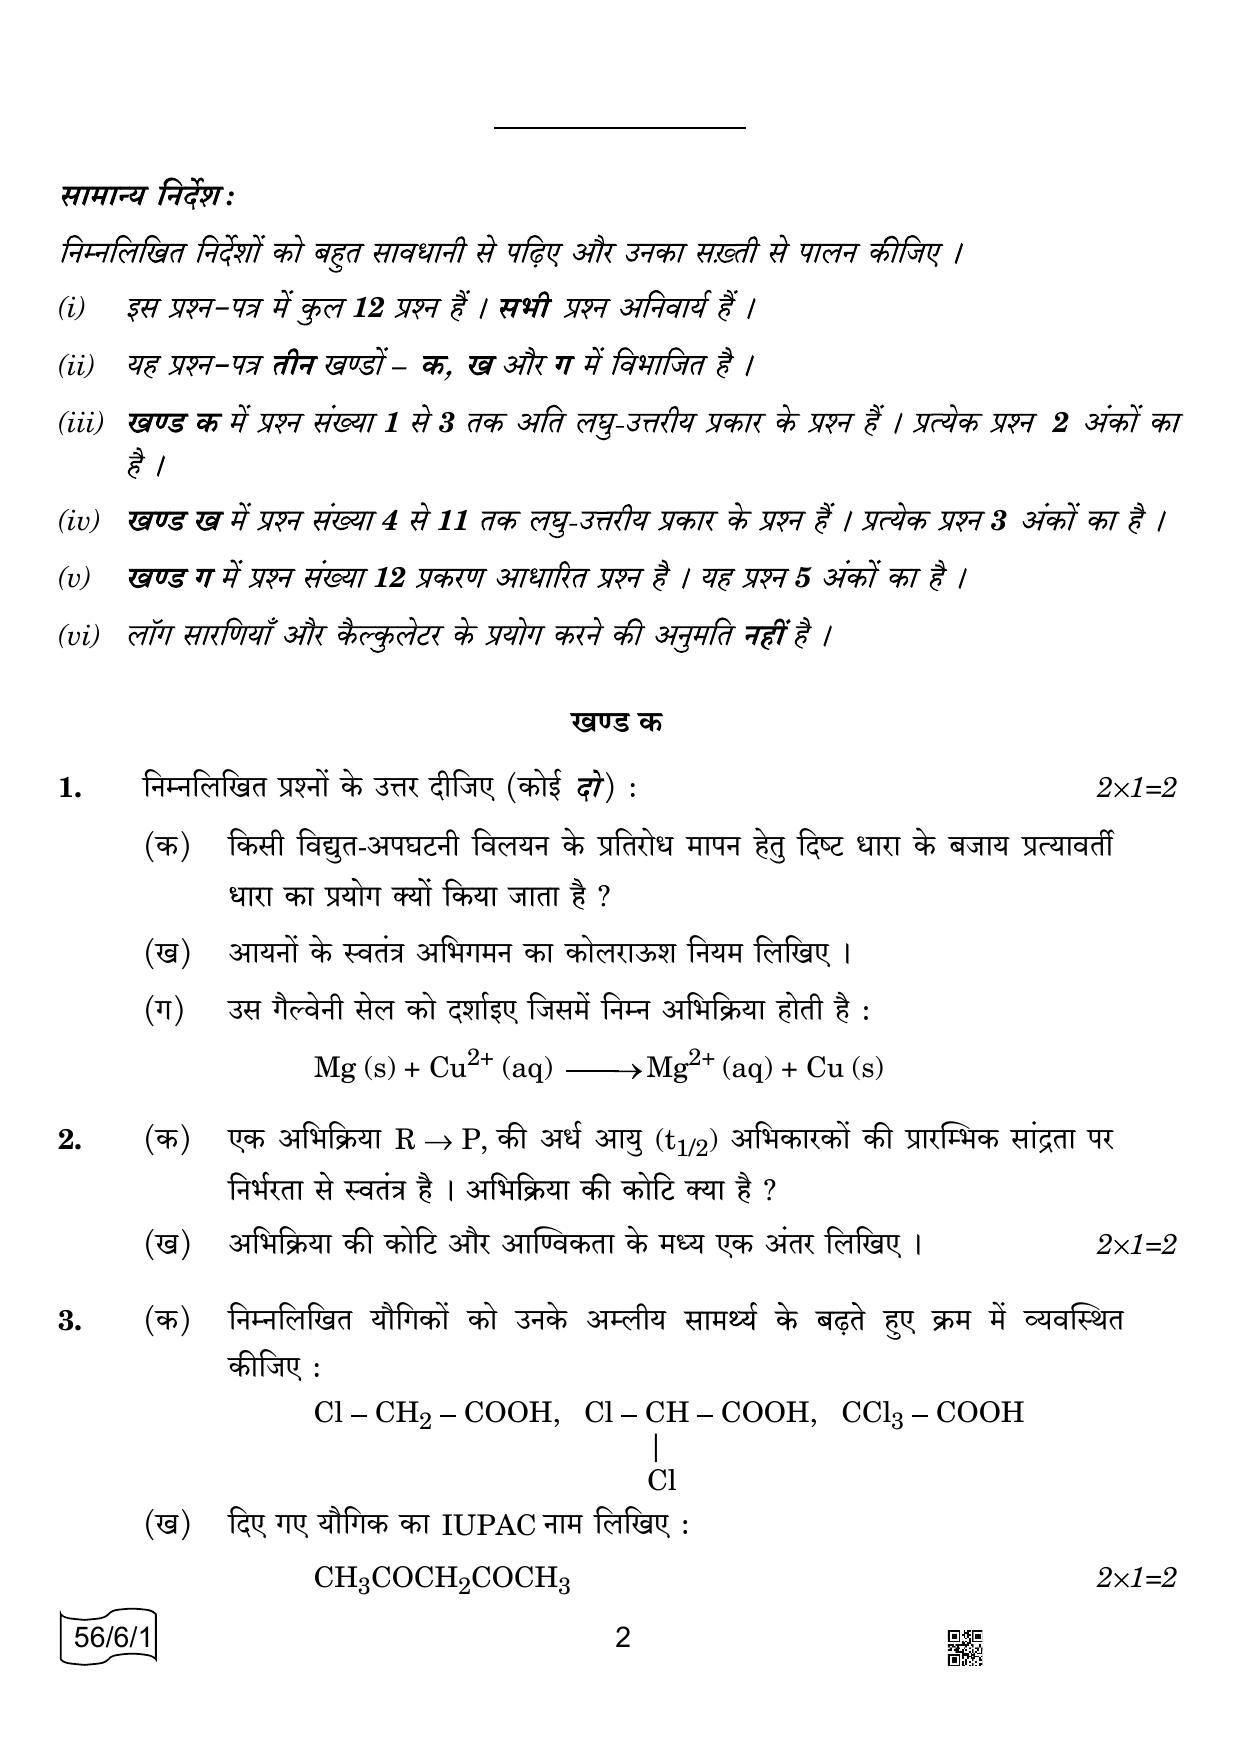 CBSE Class 12 56-6-1 CHEMISTRY 2022 Compartment Question Paper - Page 2